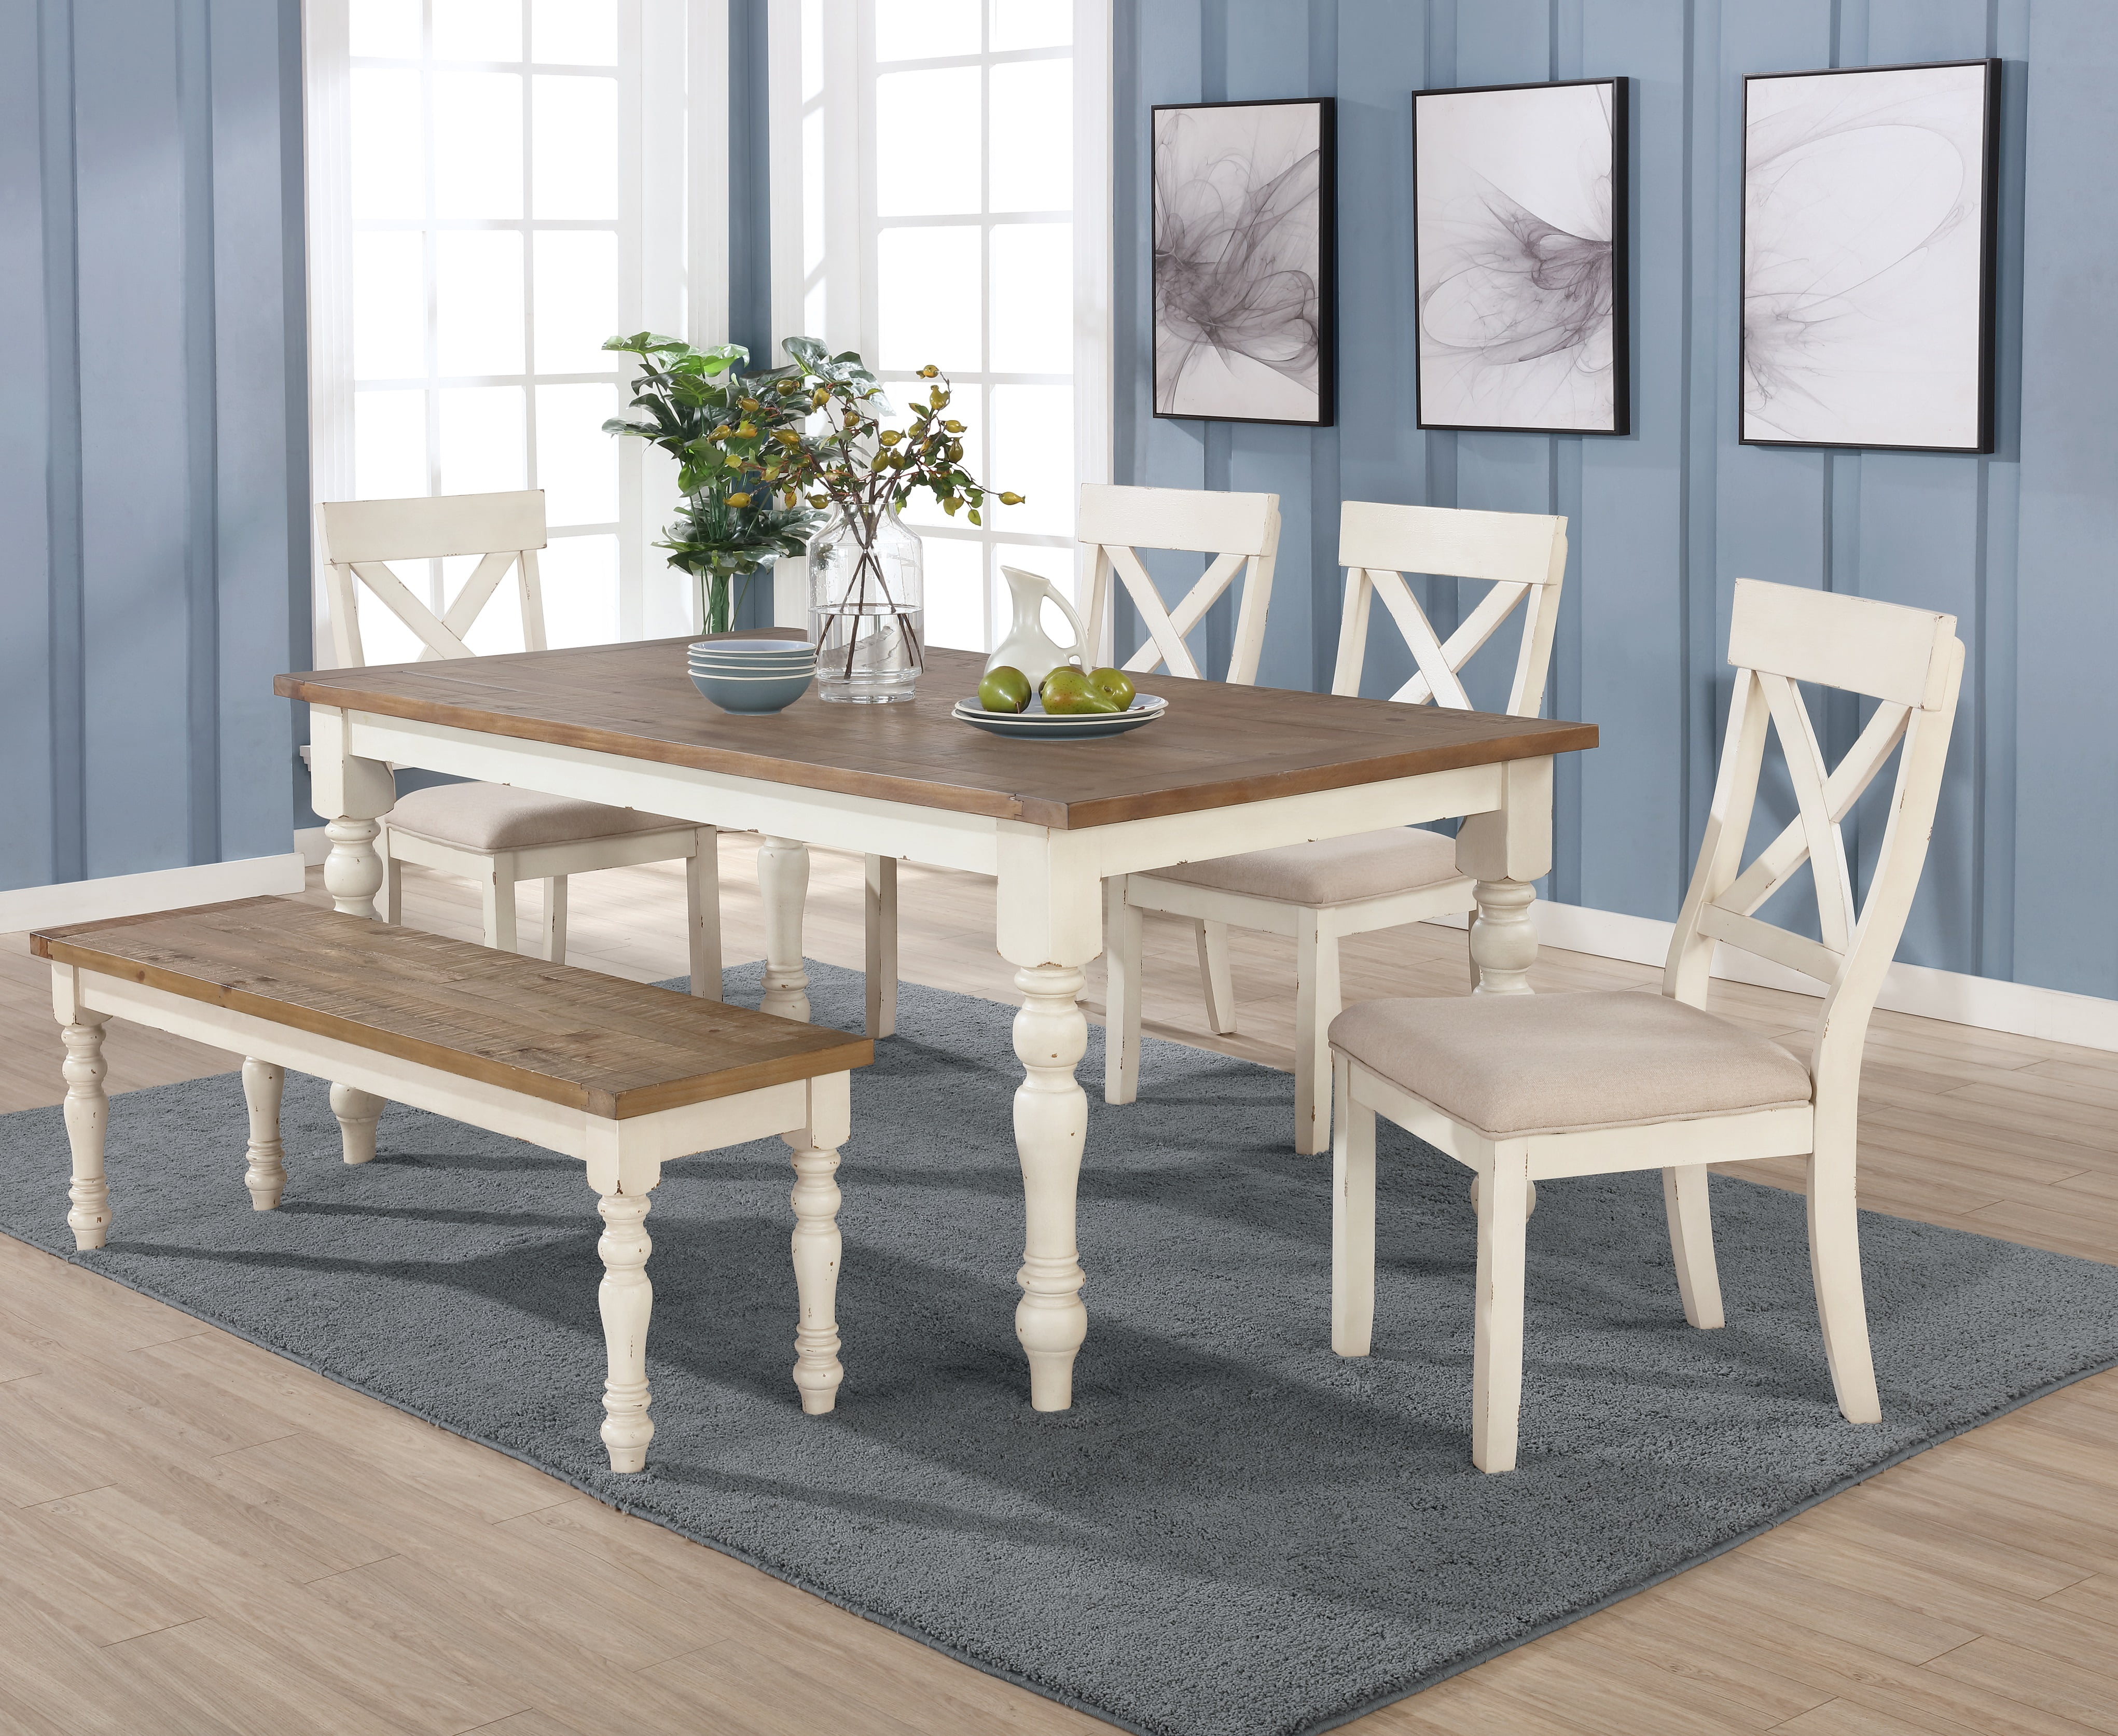 distressed dining tables furniture Dining table bench chairs oak piece distressed antique